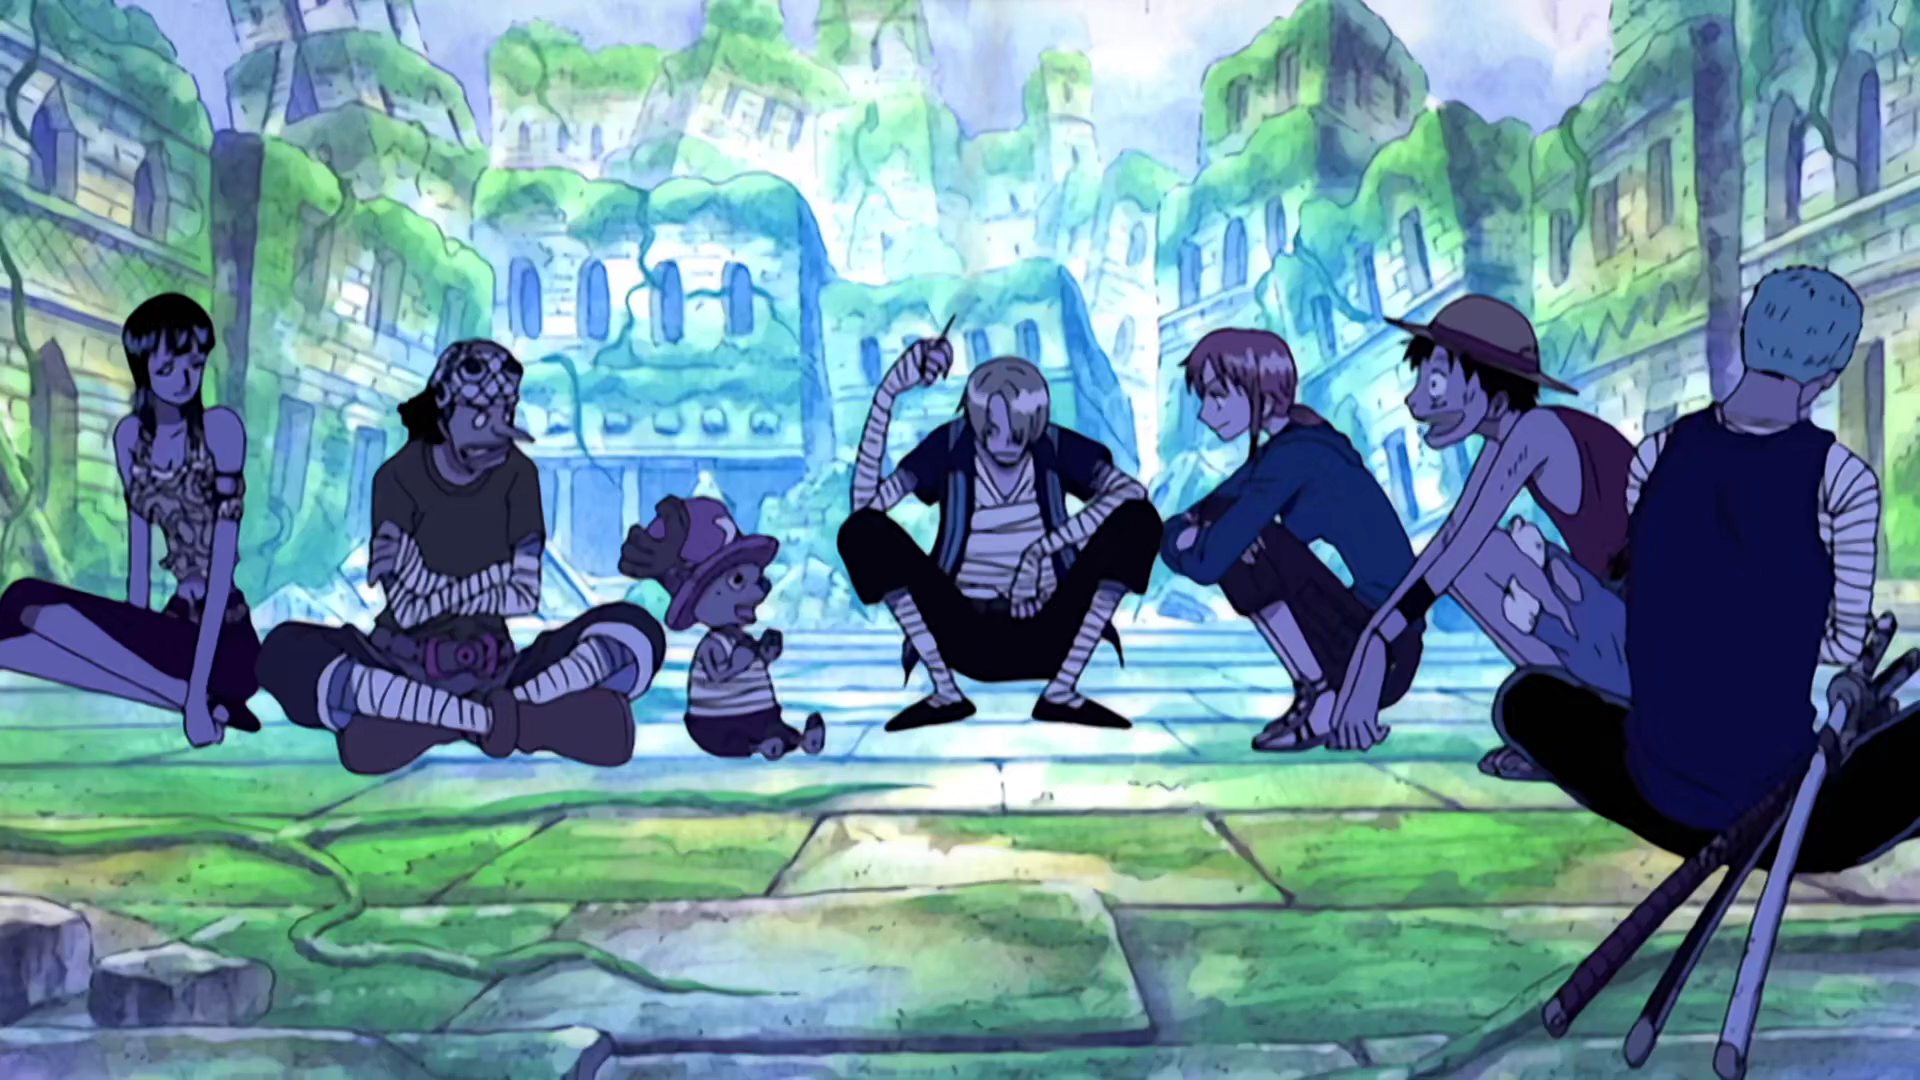 One Piece Skypiea The Straw Hats prepare their plan to steal the gold and run